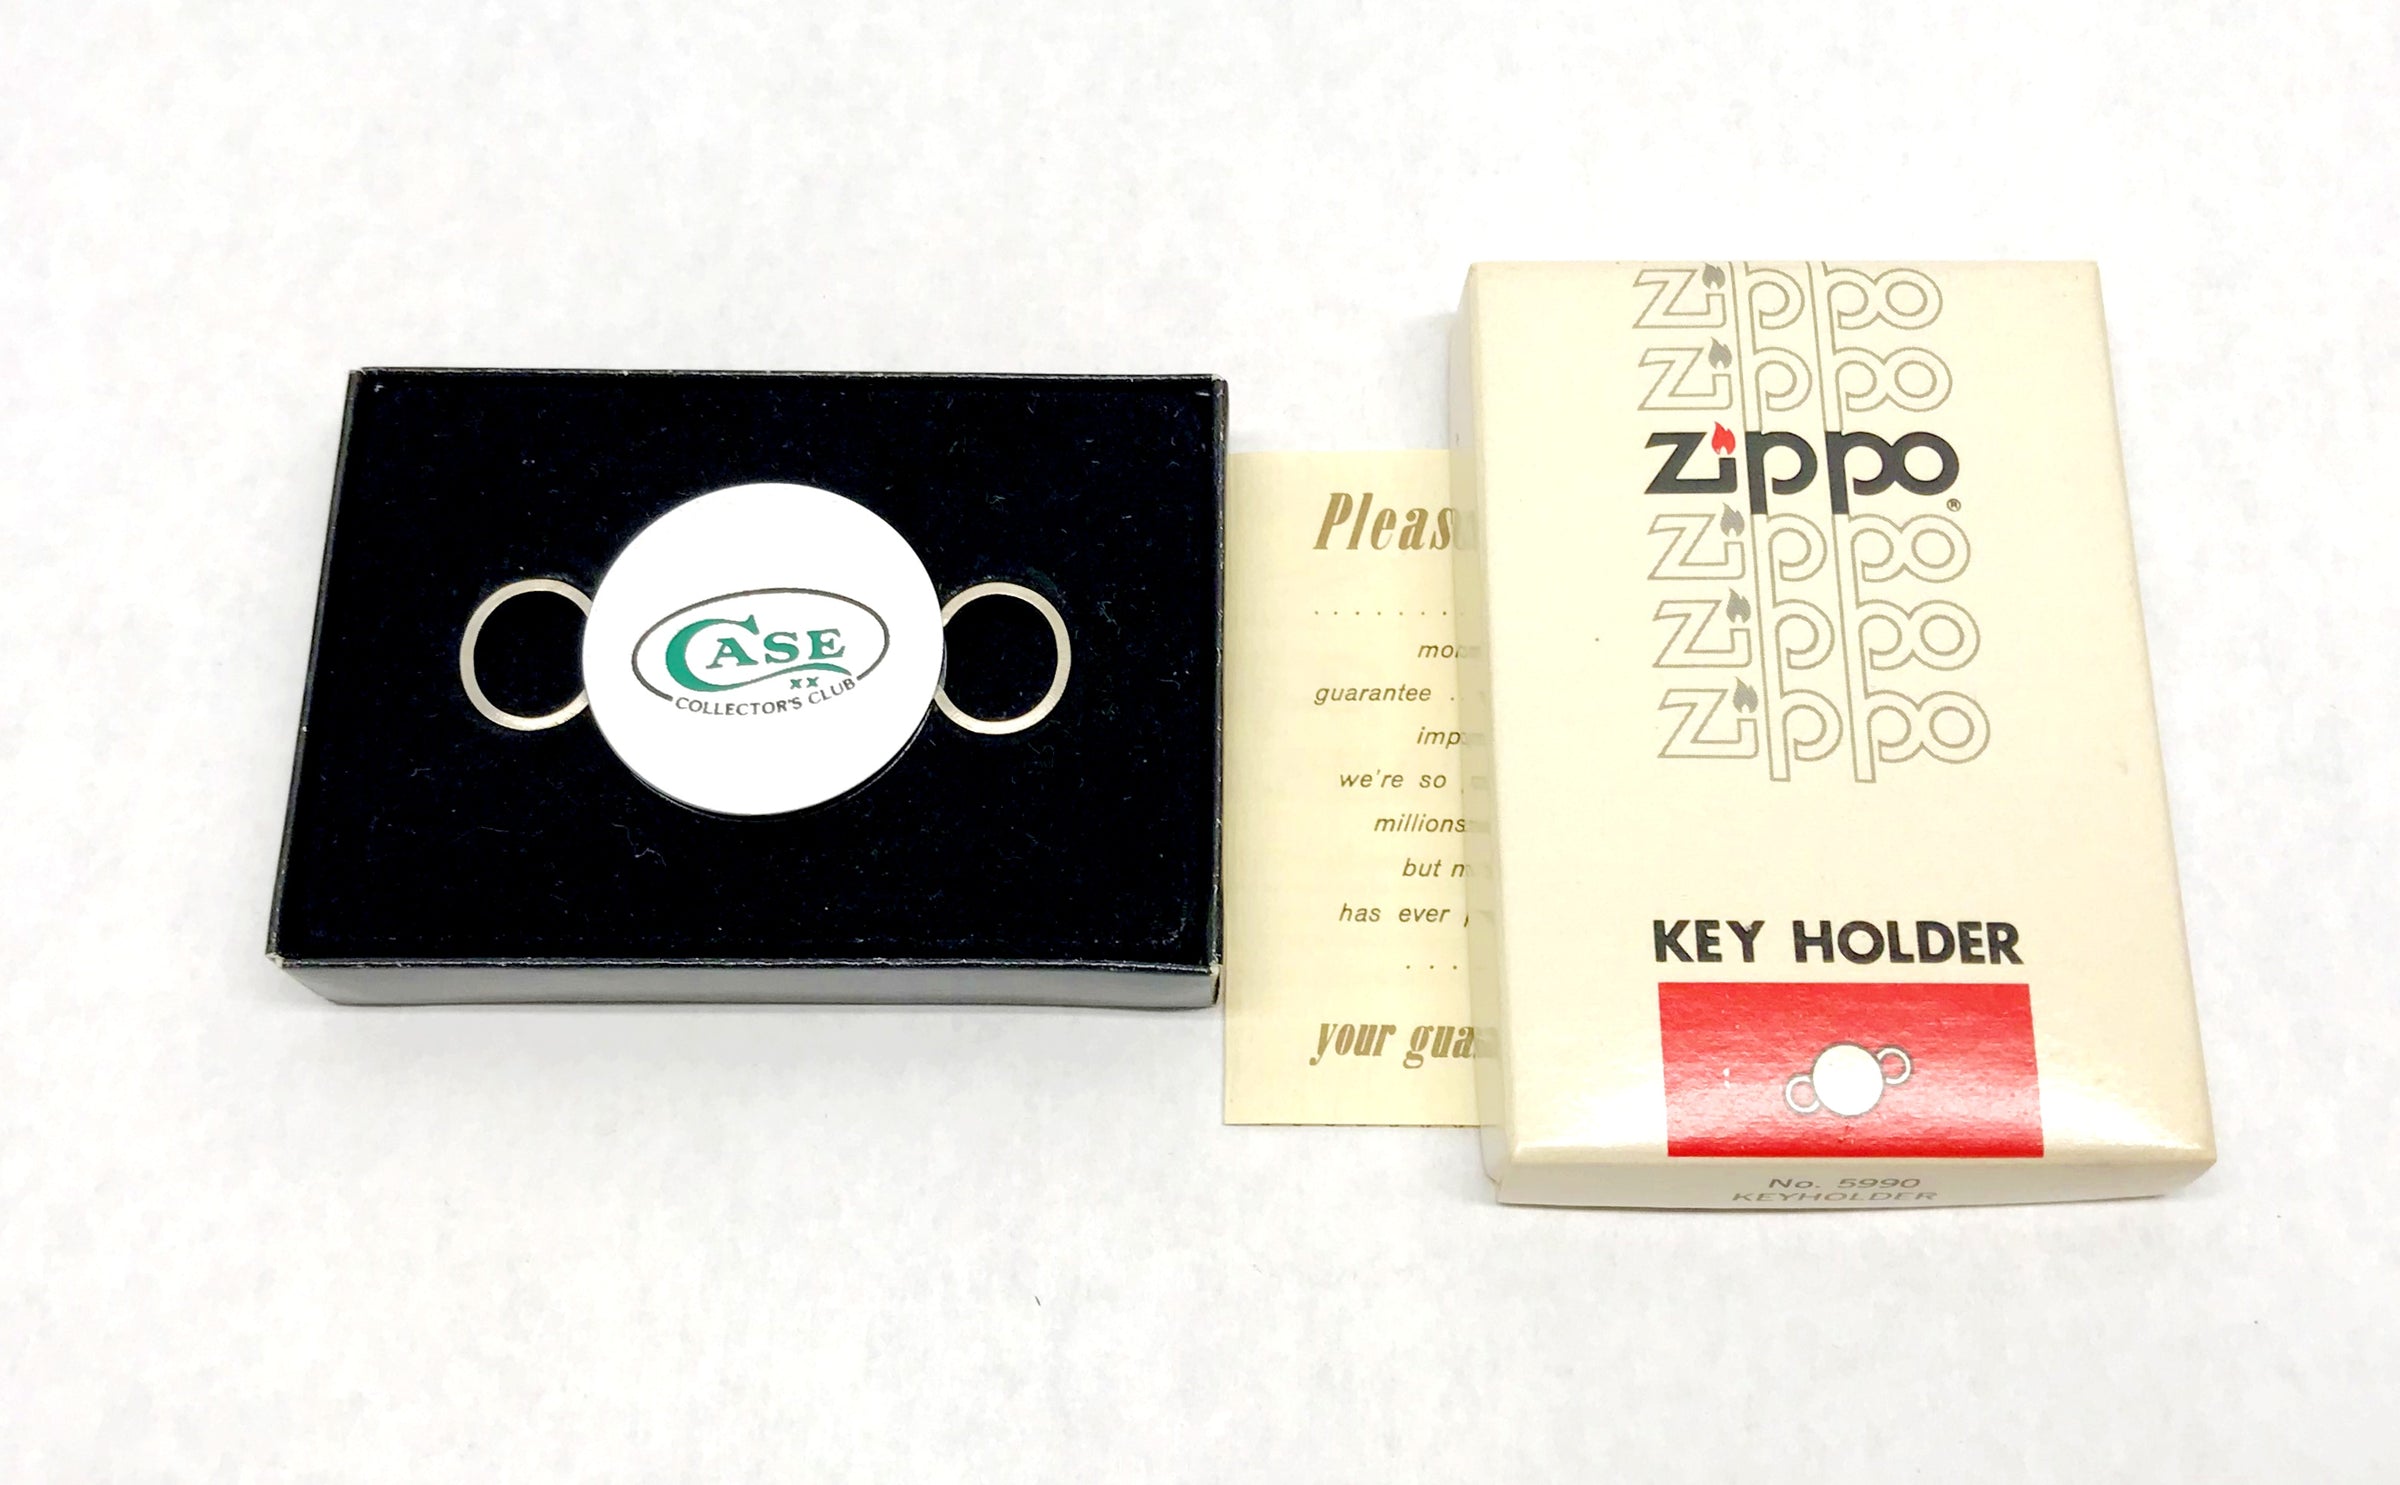 Vintage Zippo No. 5990 Case XX Collector's Club Keyholder - Hers and His Treasures